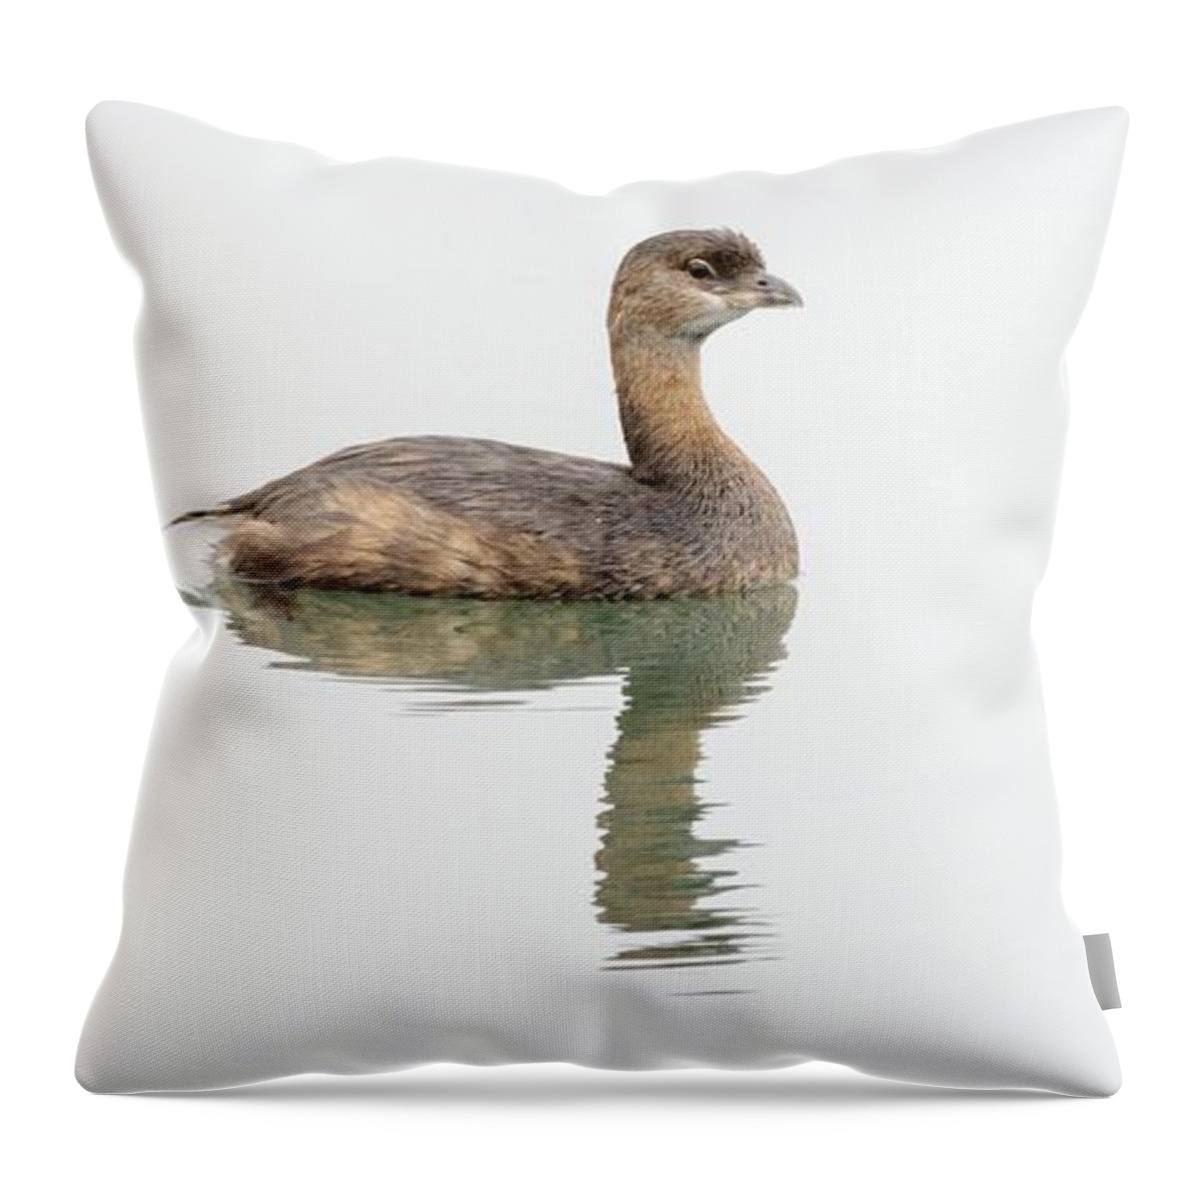  Throw Pillow featuring the photograph I am by Sherry Clark